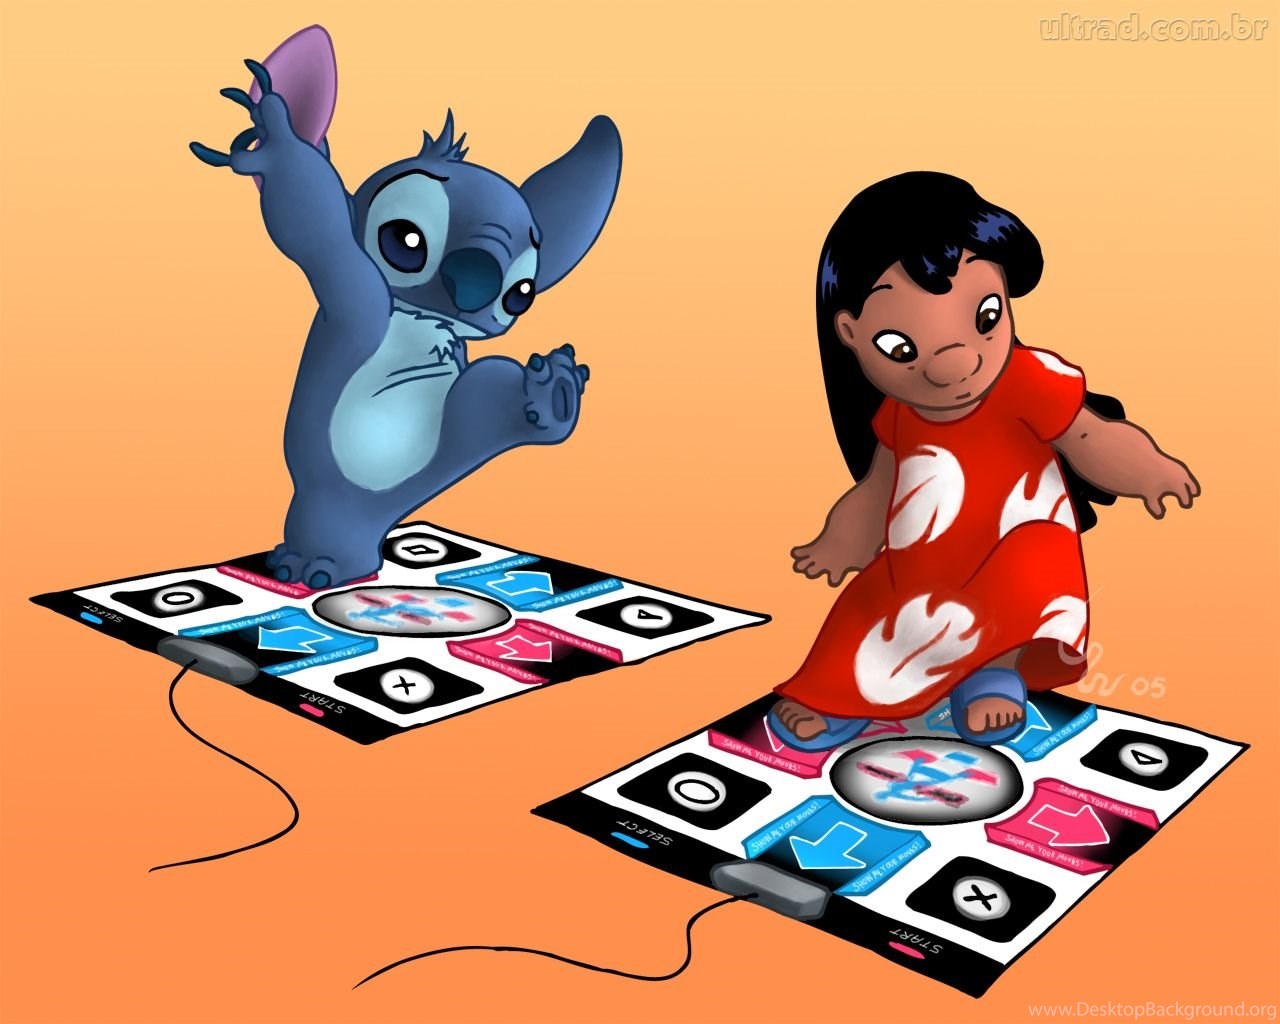 Share more than 56 stitch wallpaper halloween - in.cdgdbentre